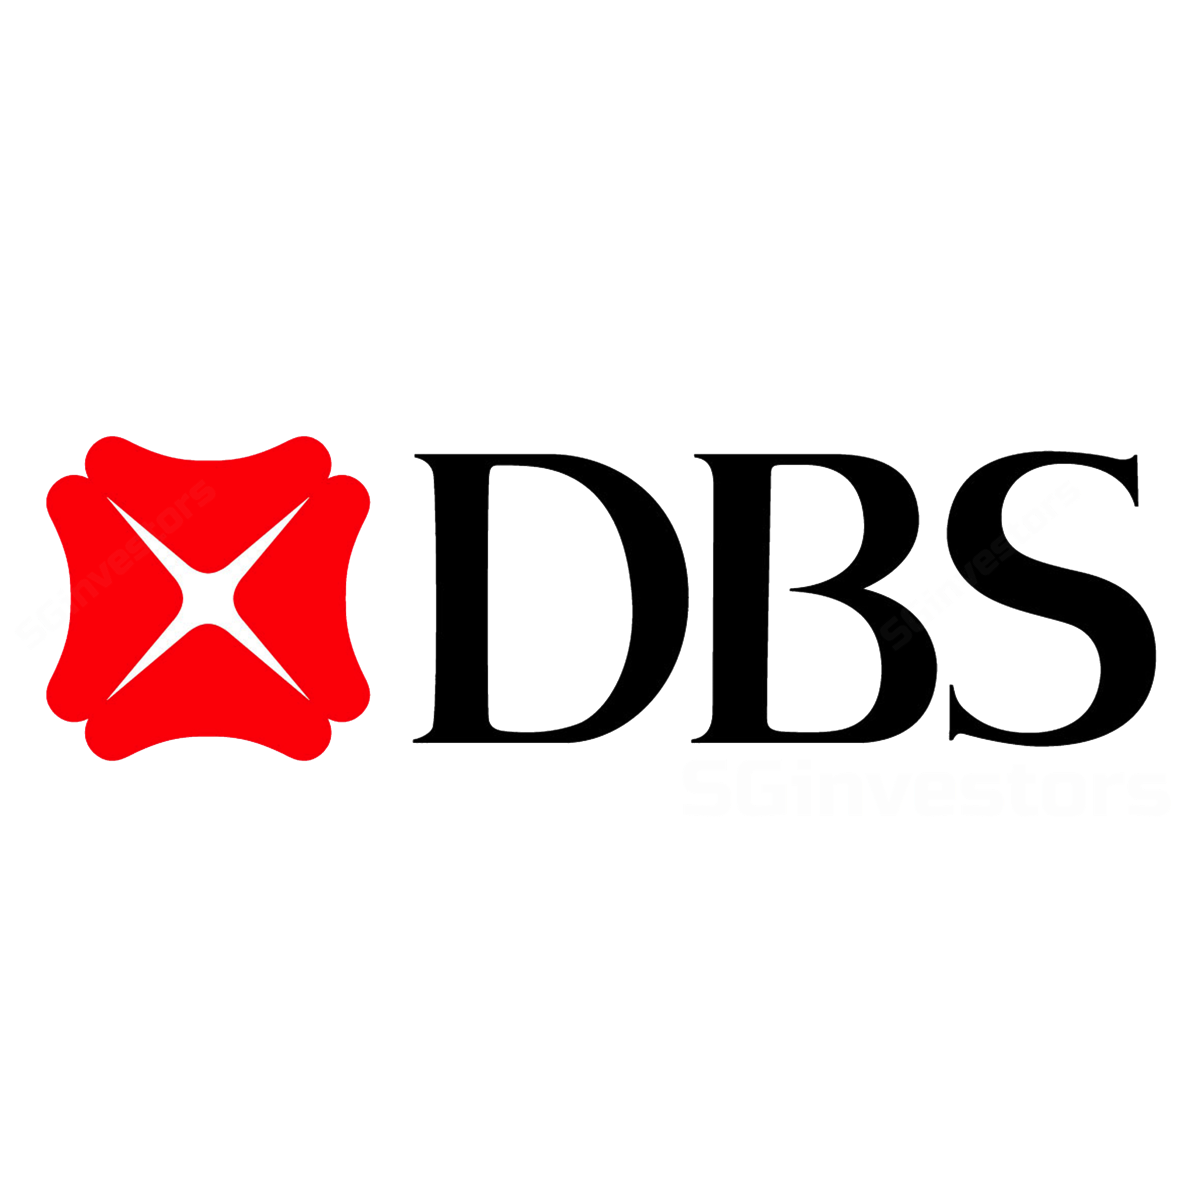 DBS GROUP HOLDINGS LTD - Phillip Securities 2017-08-07: Profit Before Allowance Remains Weak As Coverage Ratio Deteriorates